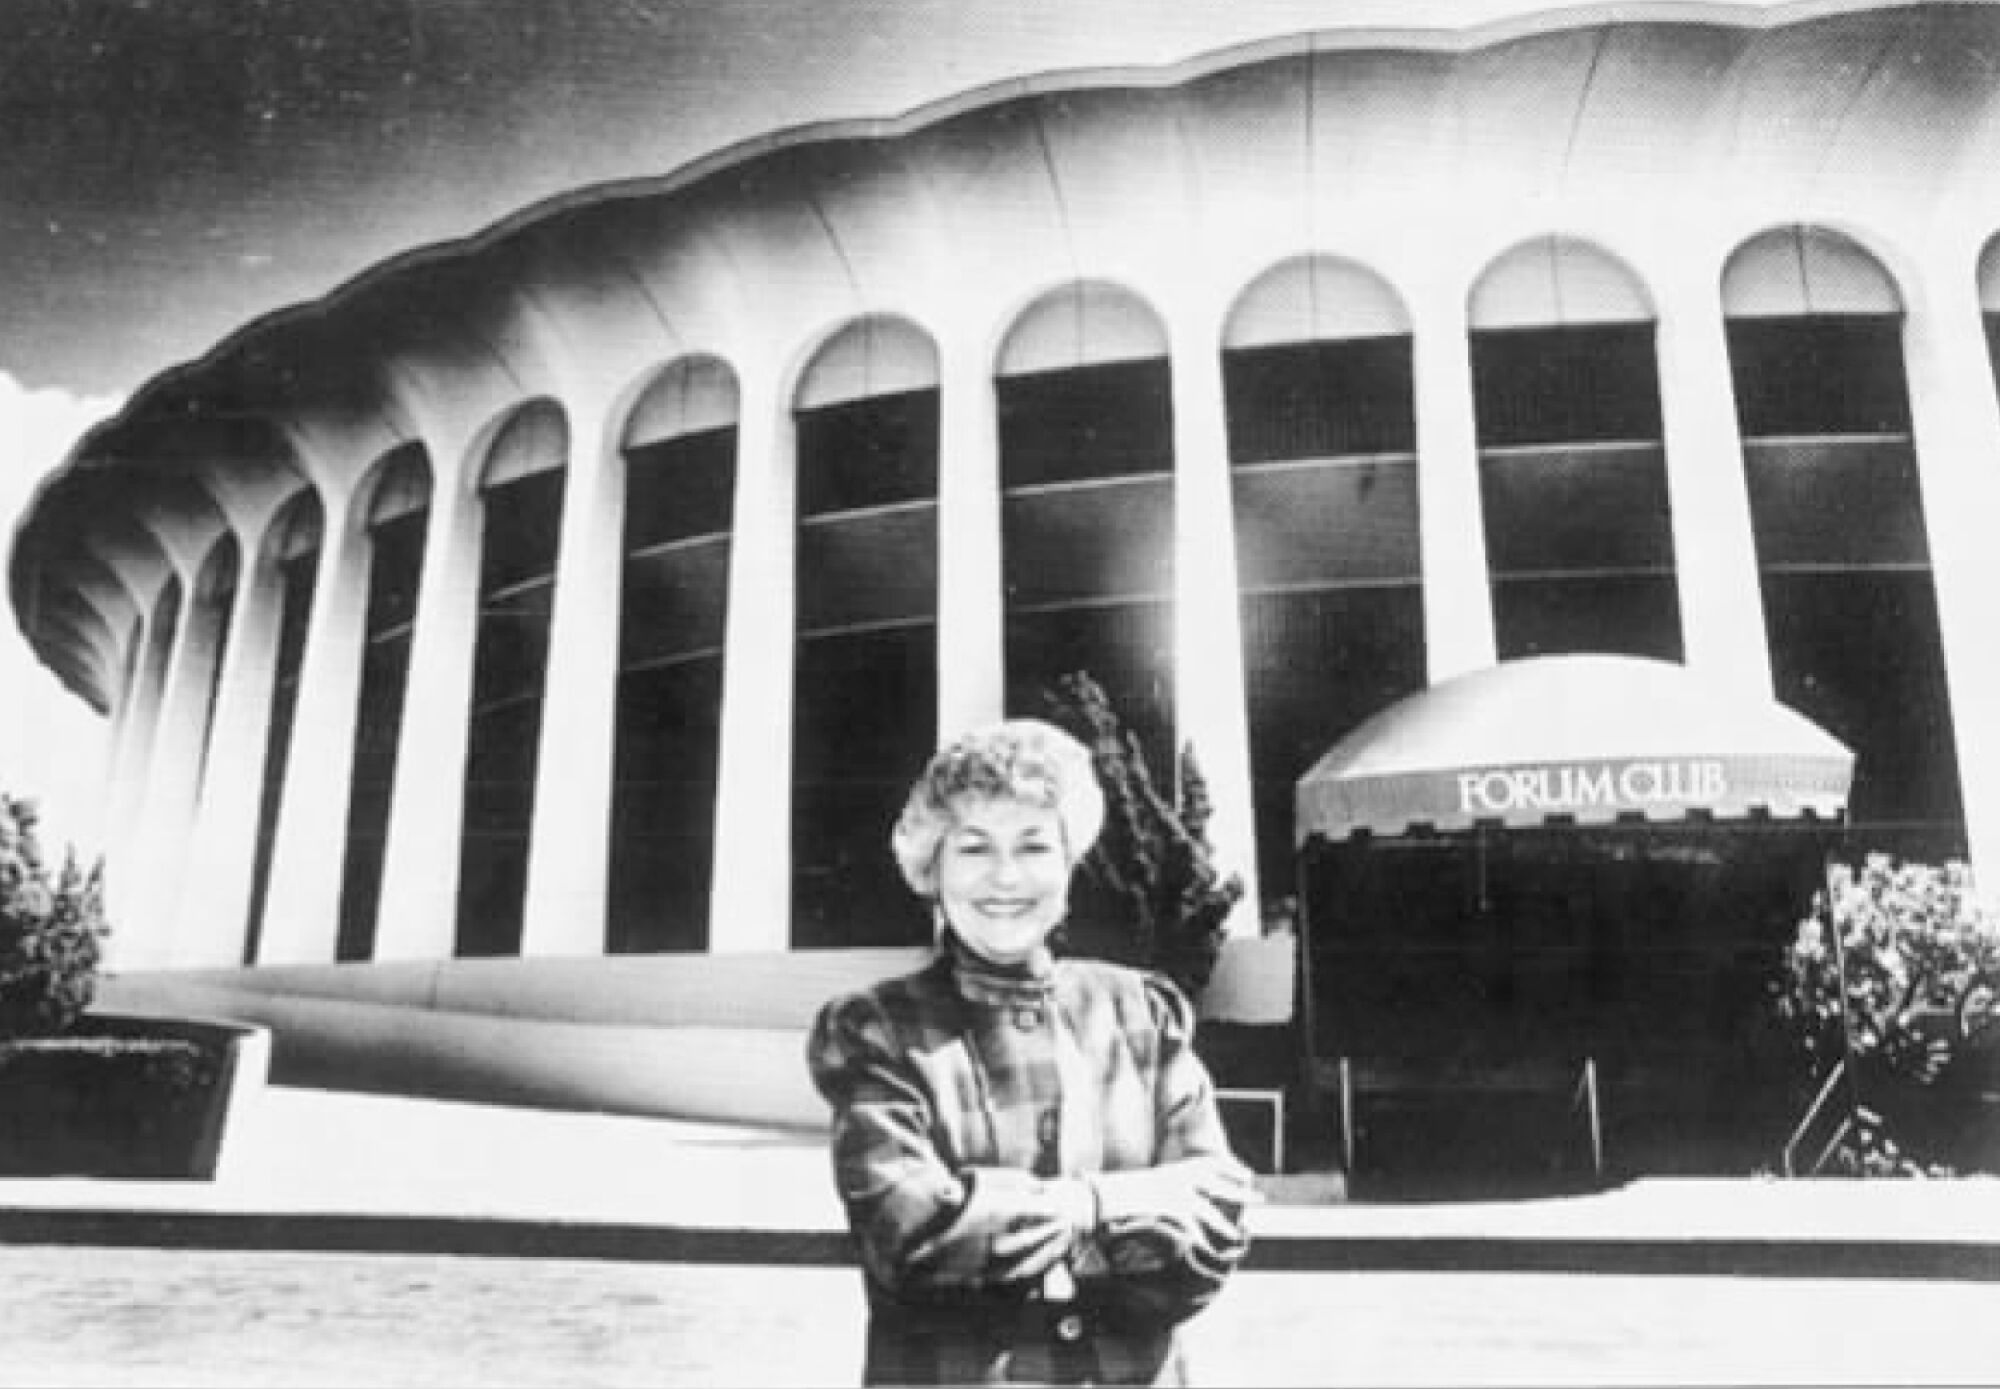 Claire Rothman in front of the Forum